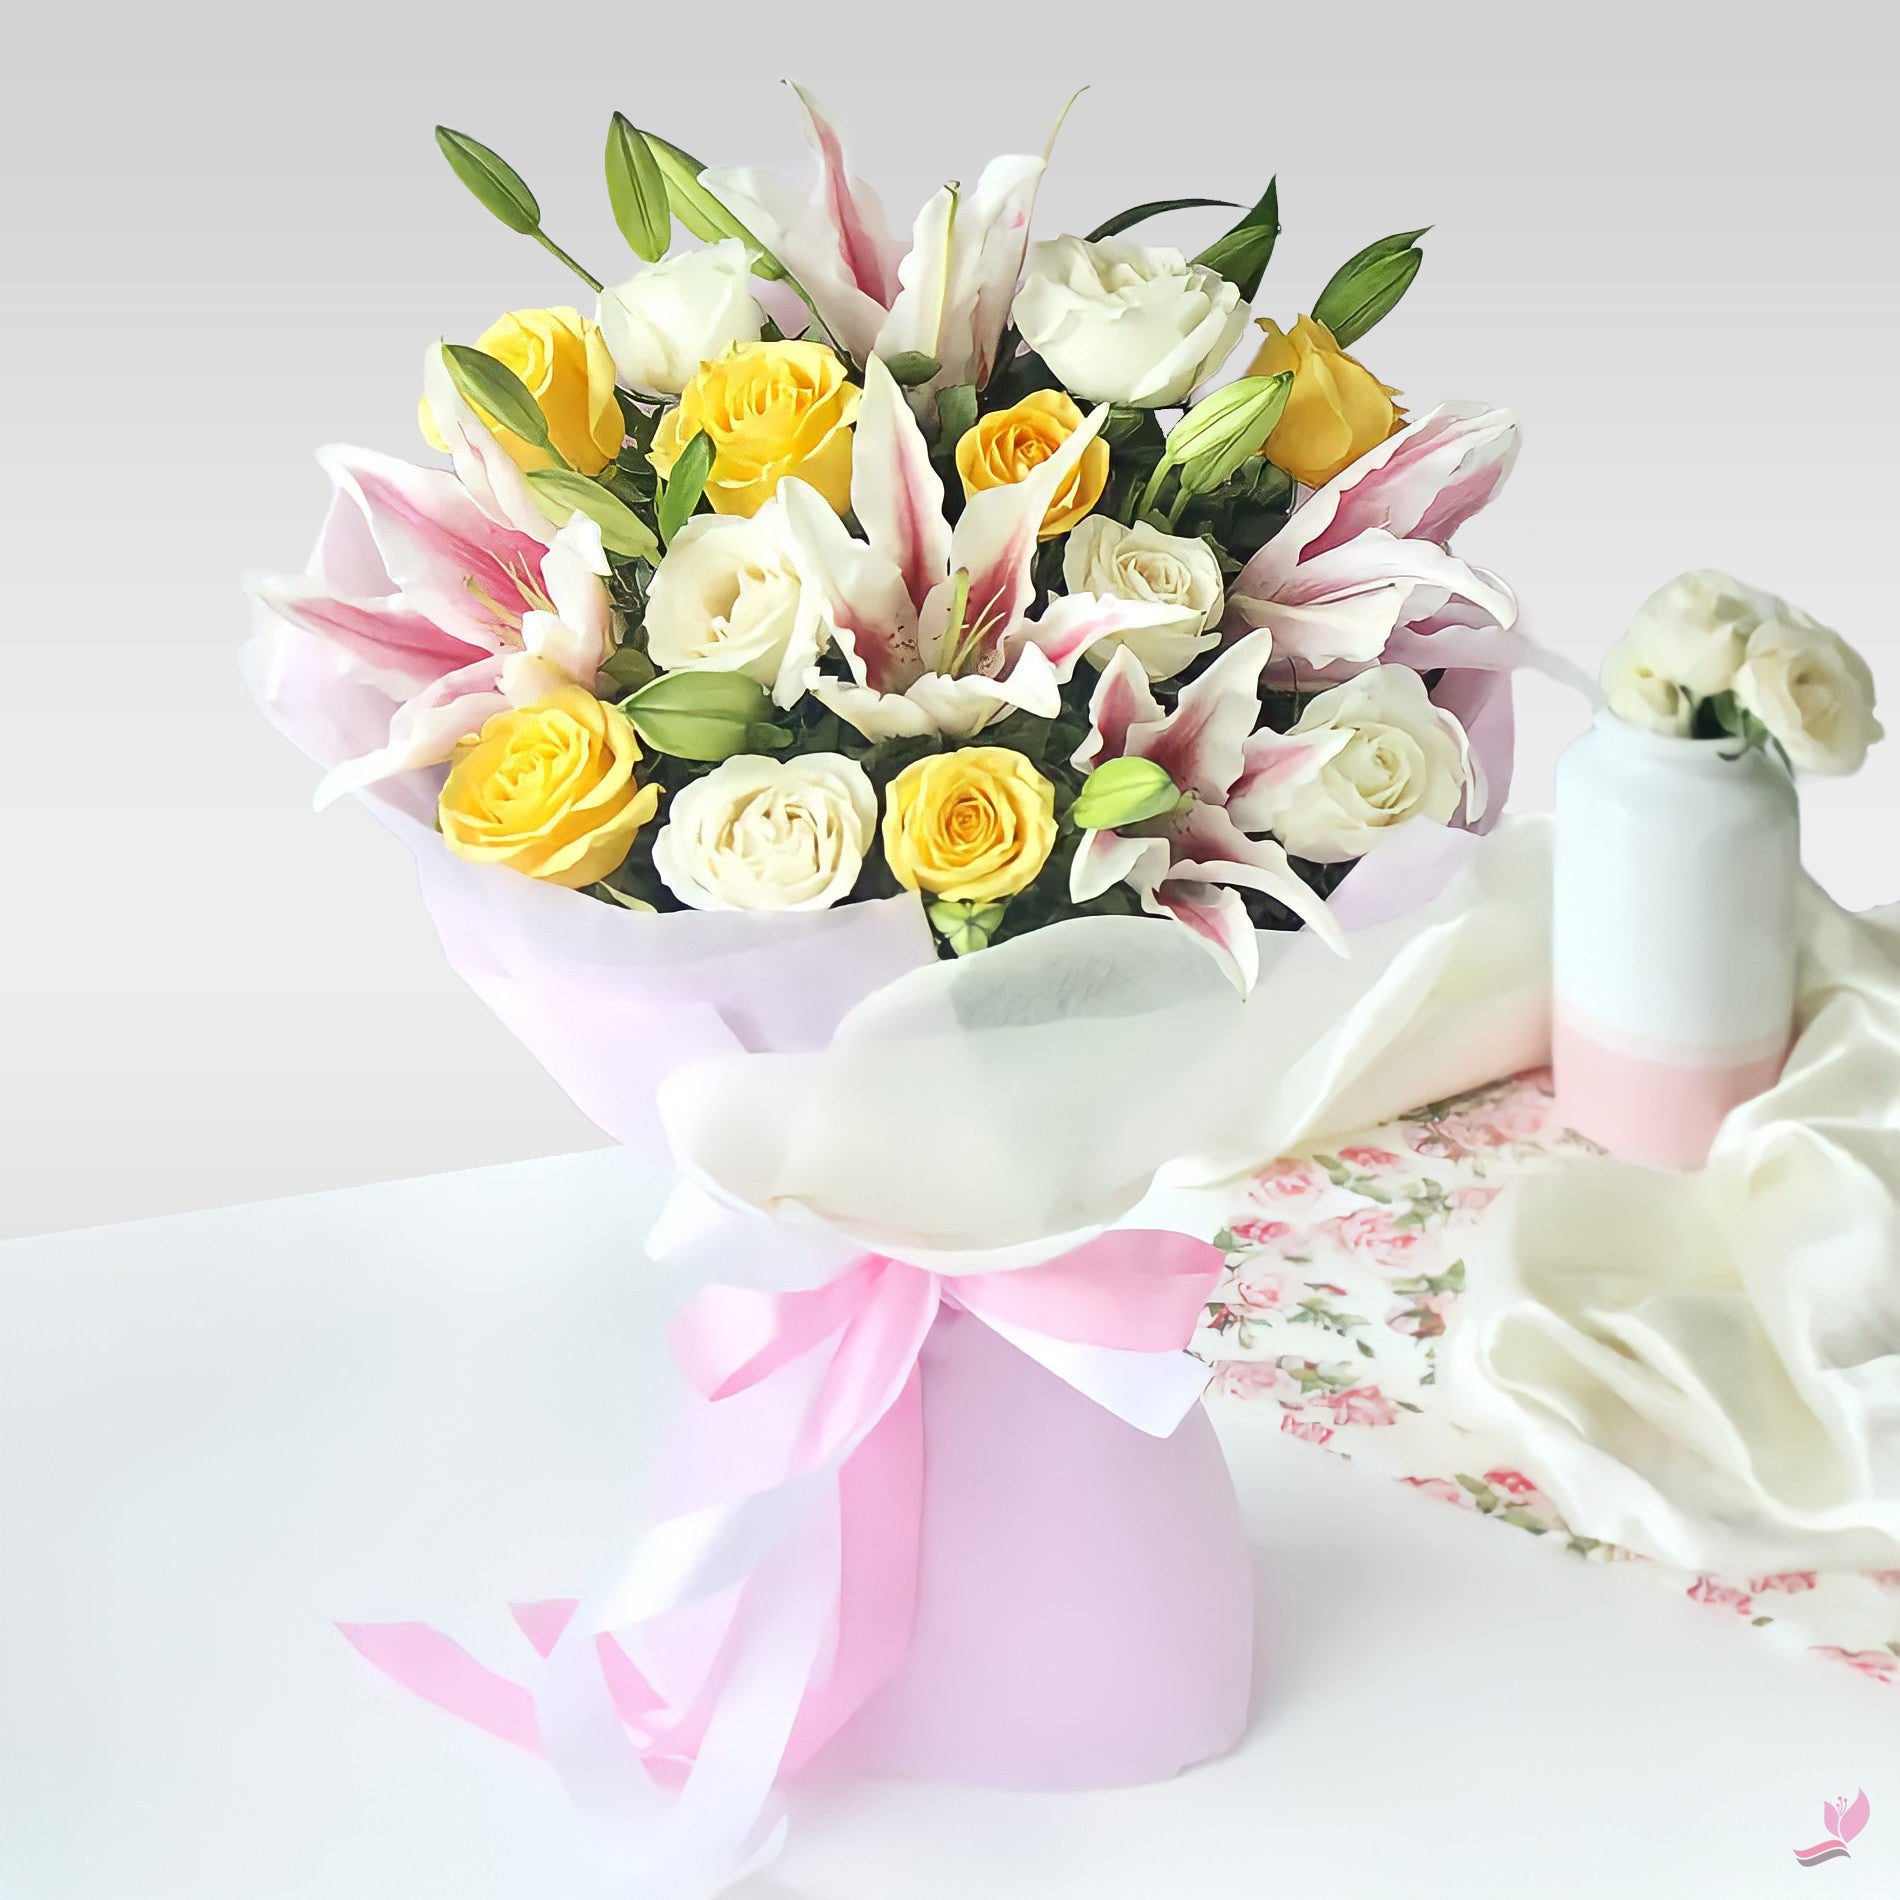 Bouquet Of 12 Stems Of Yellow And White Roses And 4 Stems Of Pink Lillies